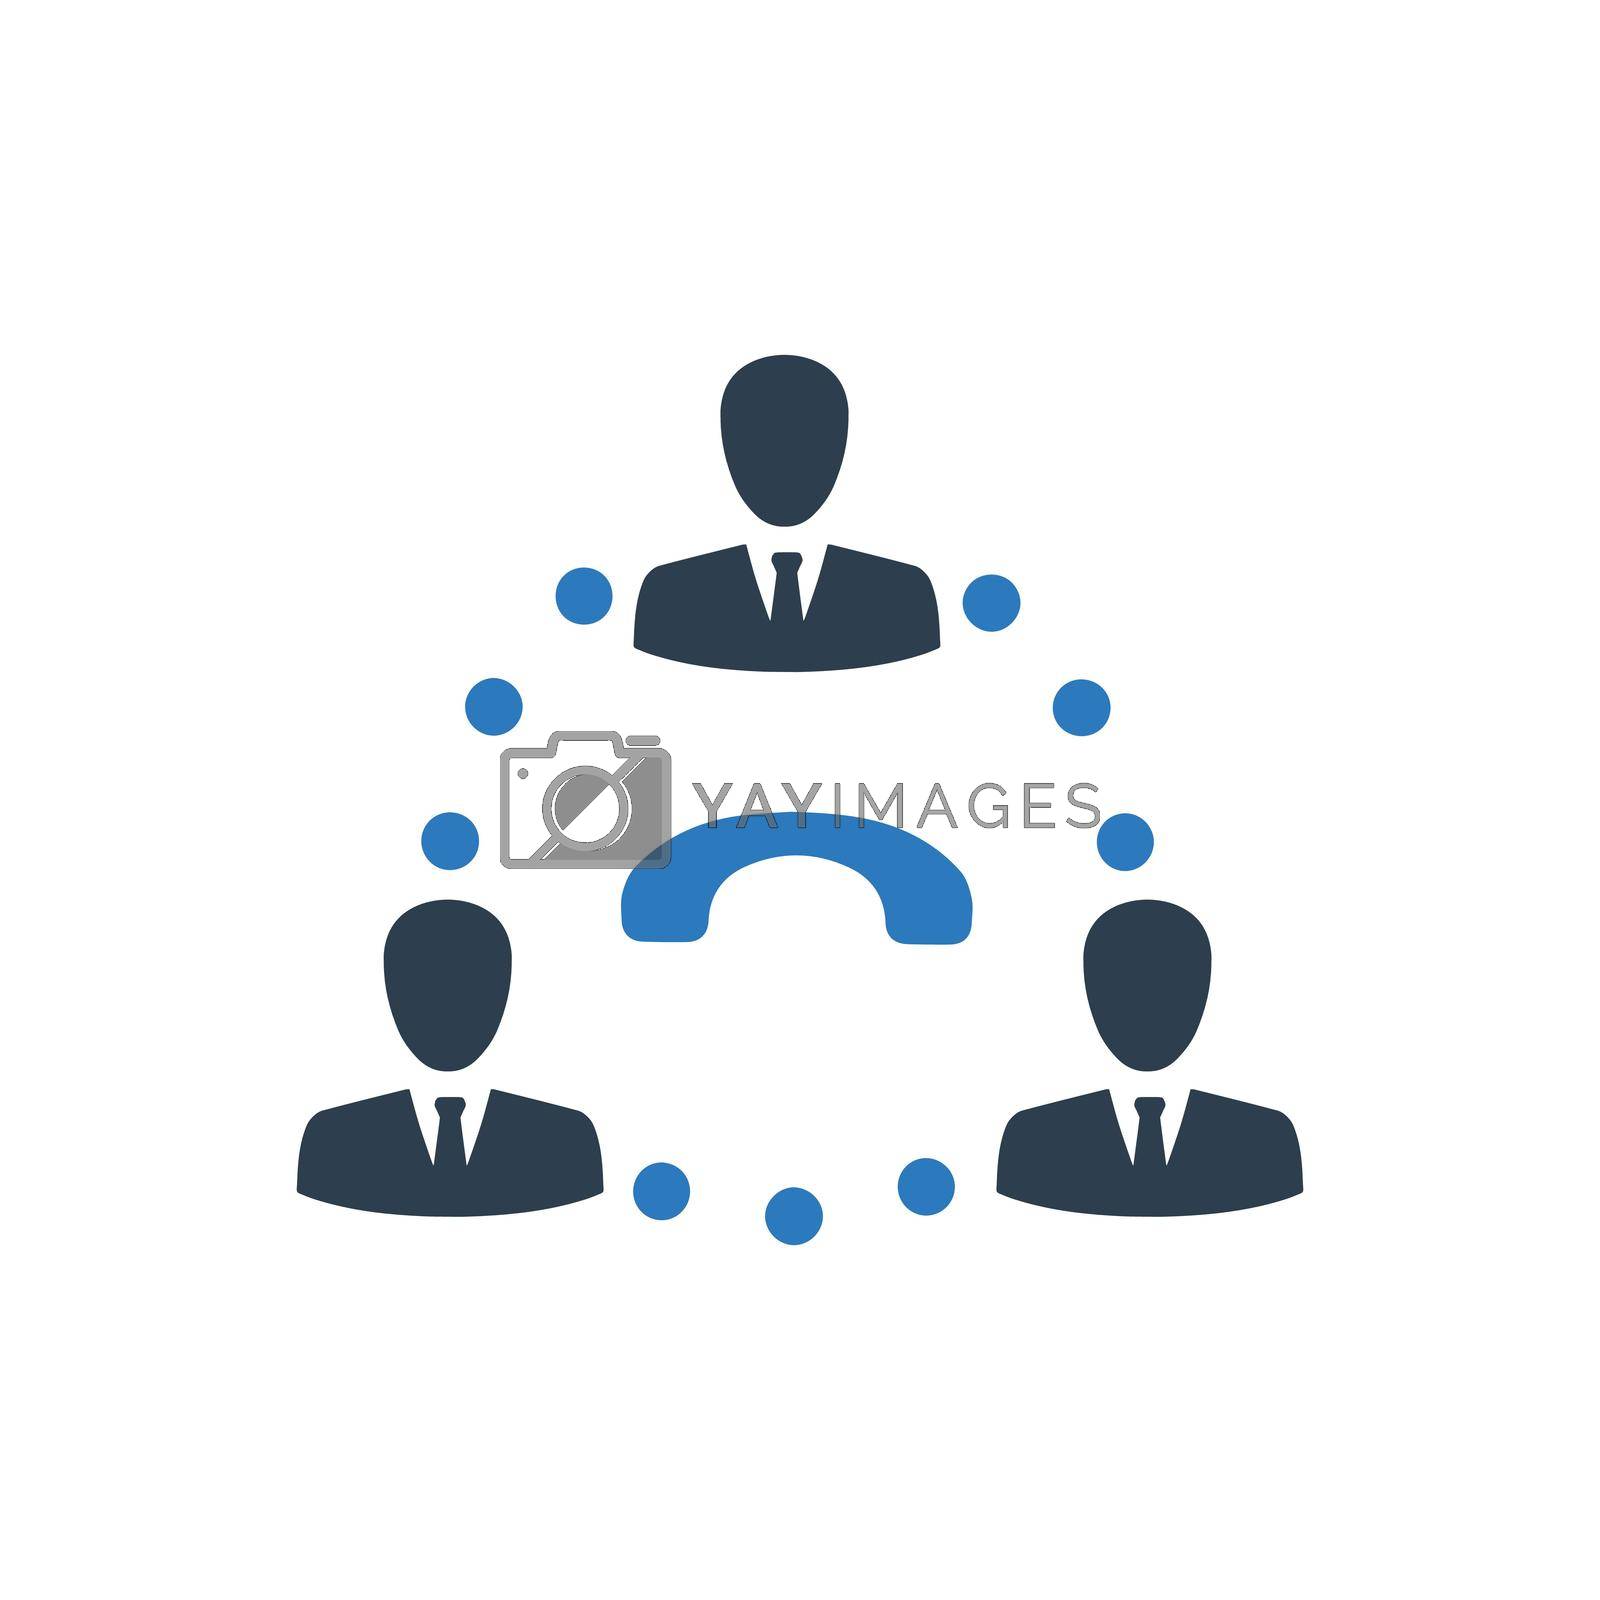 Business Communication icon. Meticulously designed vector EPS file.